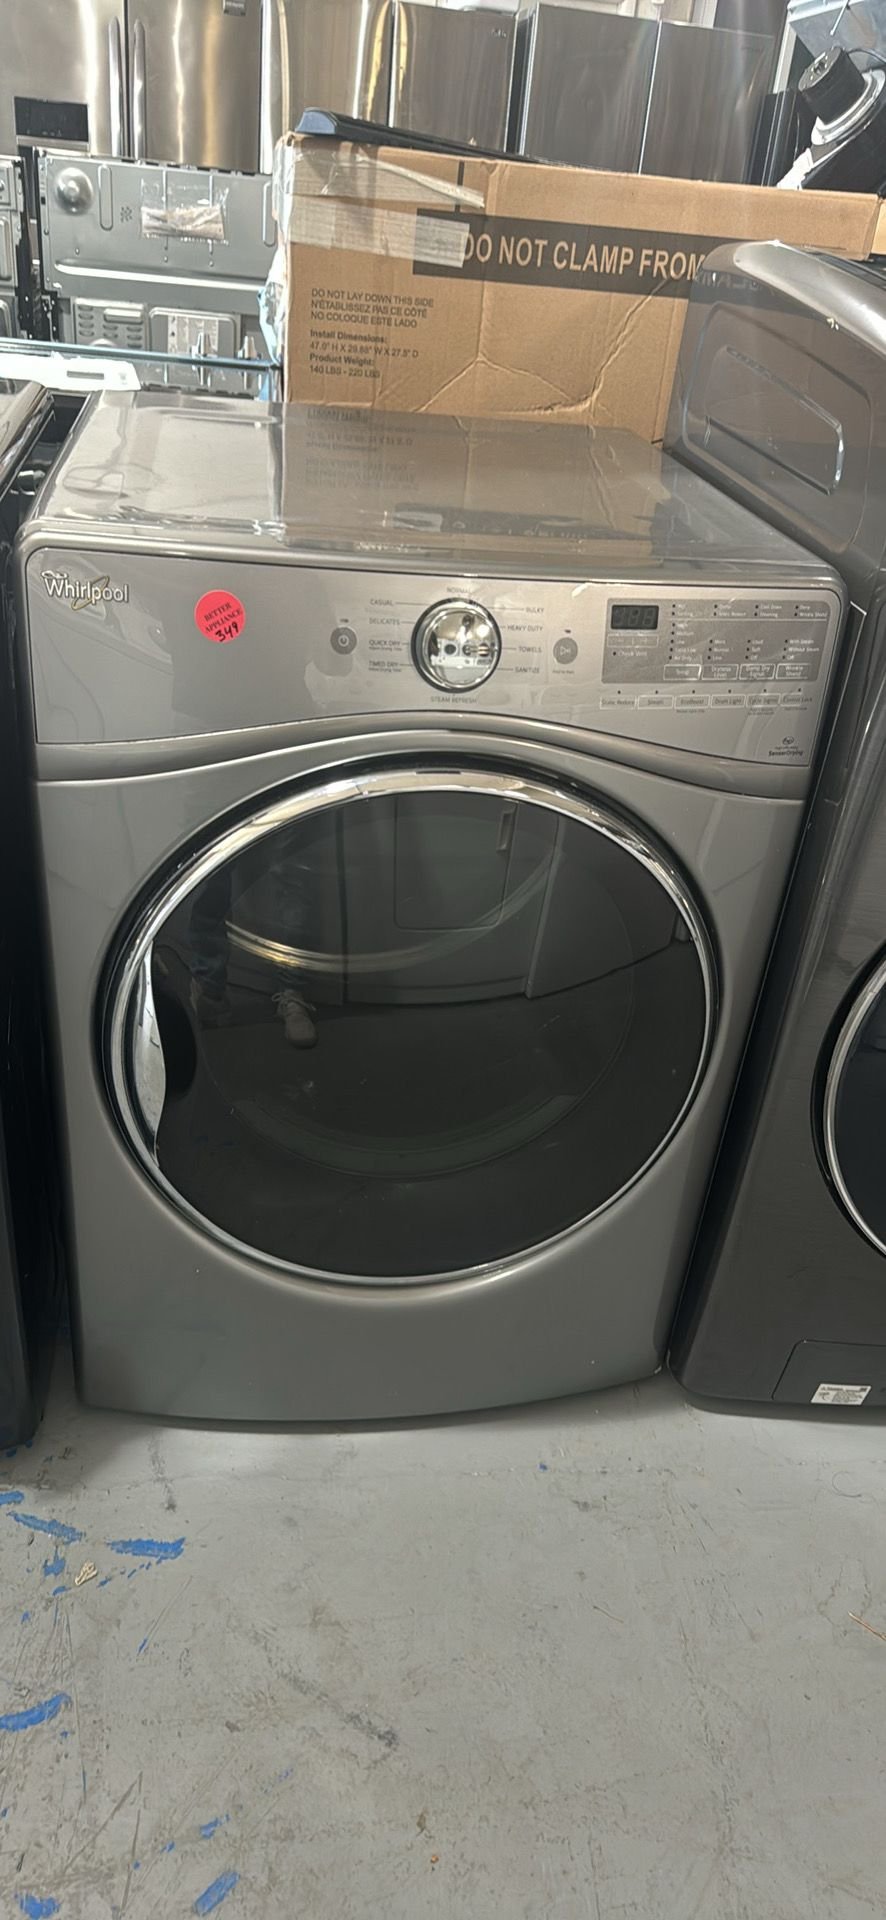 Whirlpool Used Front Load Dryer